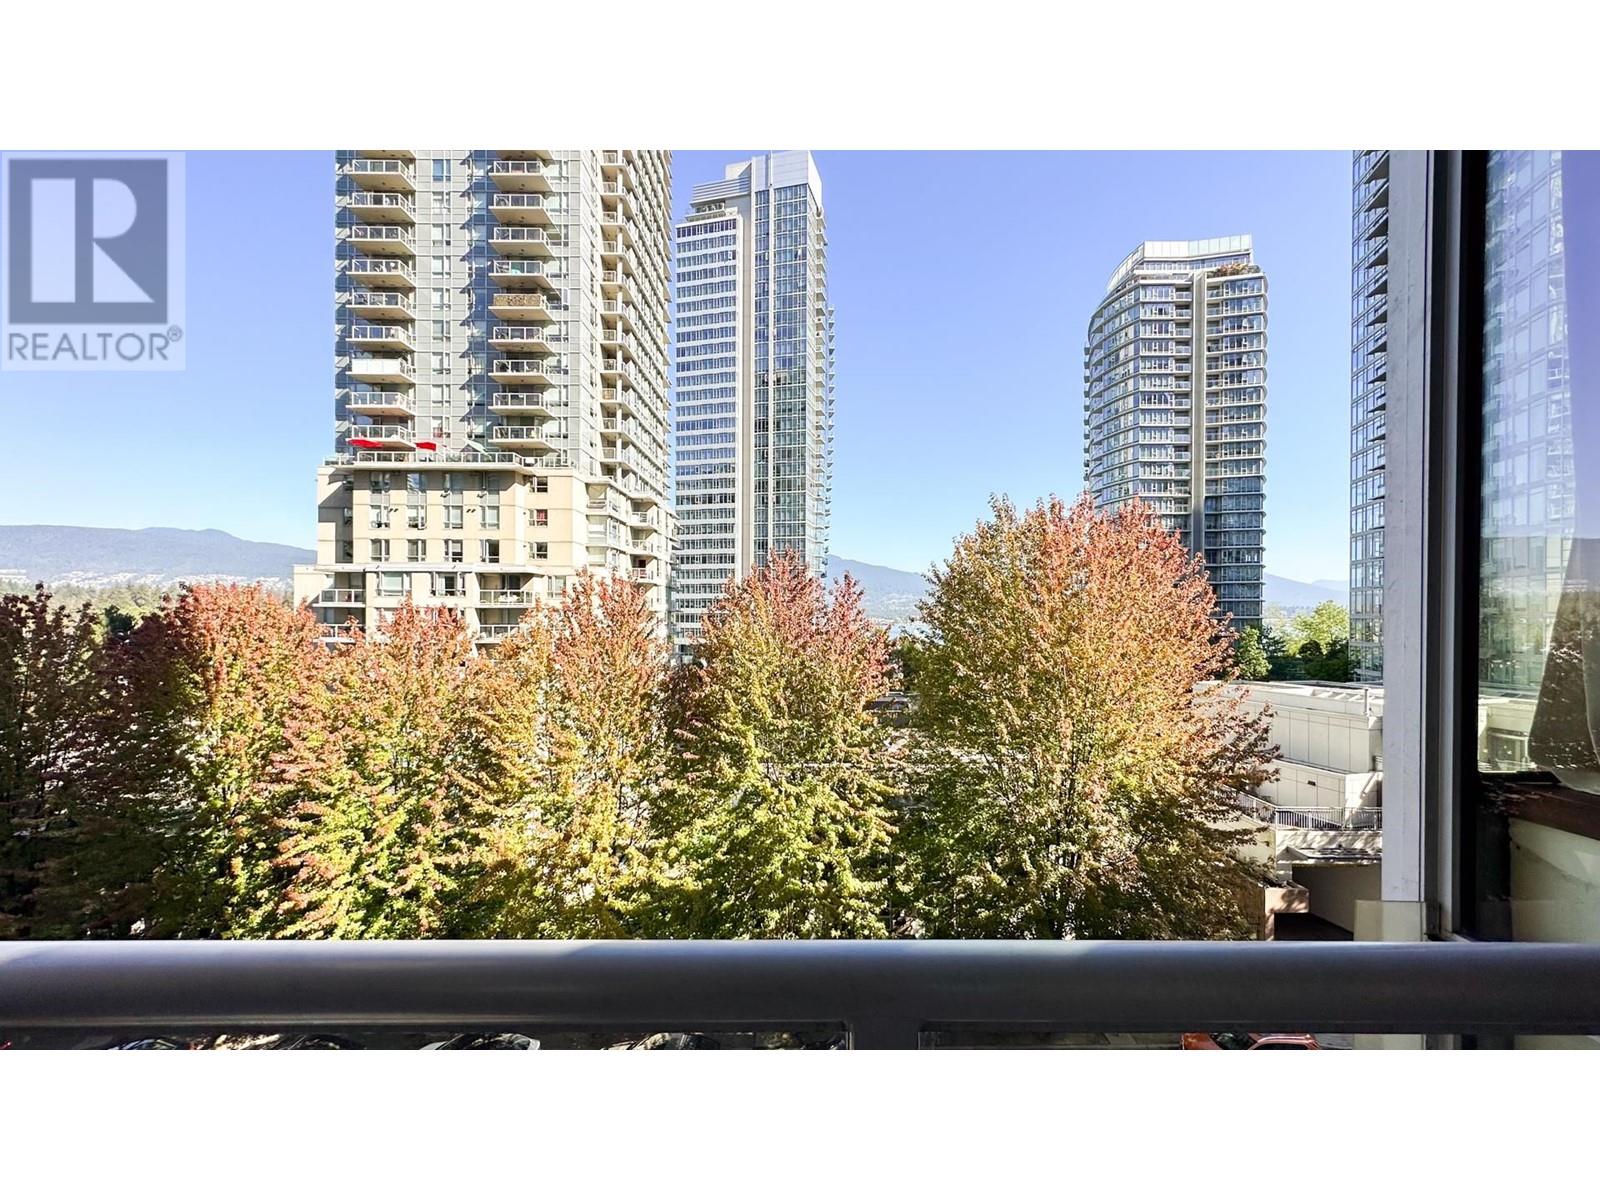 Listing Picture 23 of 23 : 402 1228 W HASTINGS STREET, Vancouver / 溫哥華 - 魯藝地產 Yvonne Lu Group - MLS Medallion Club Member